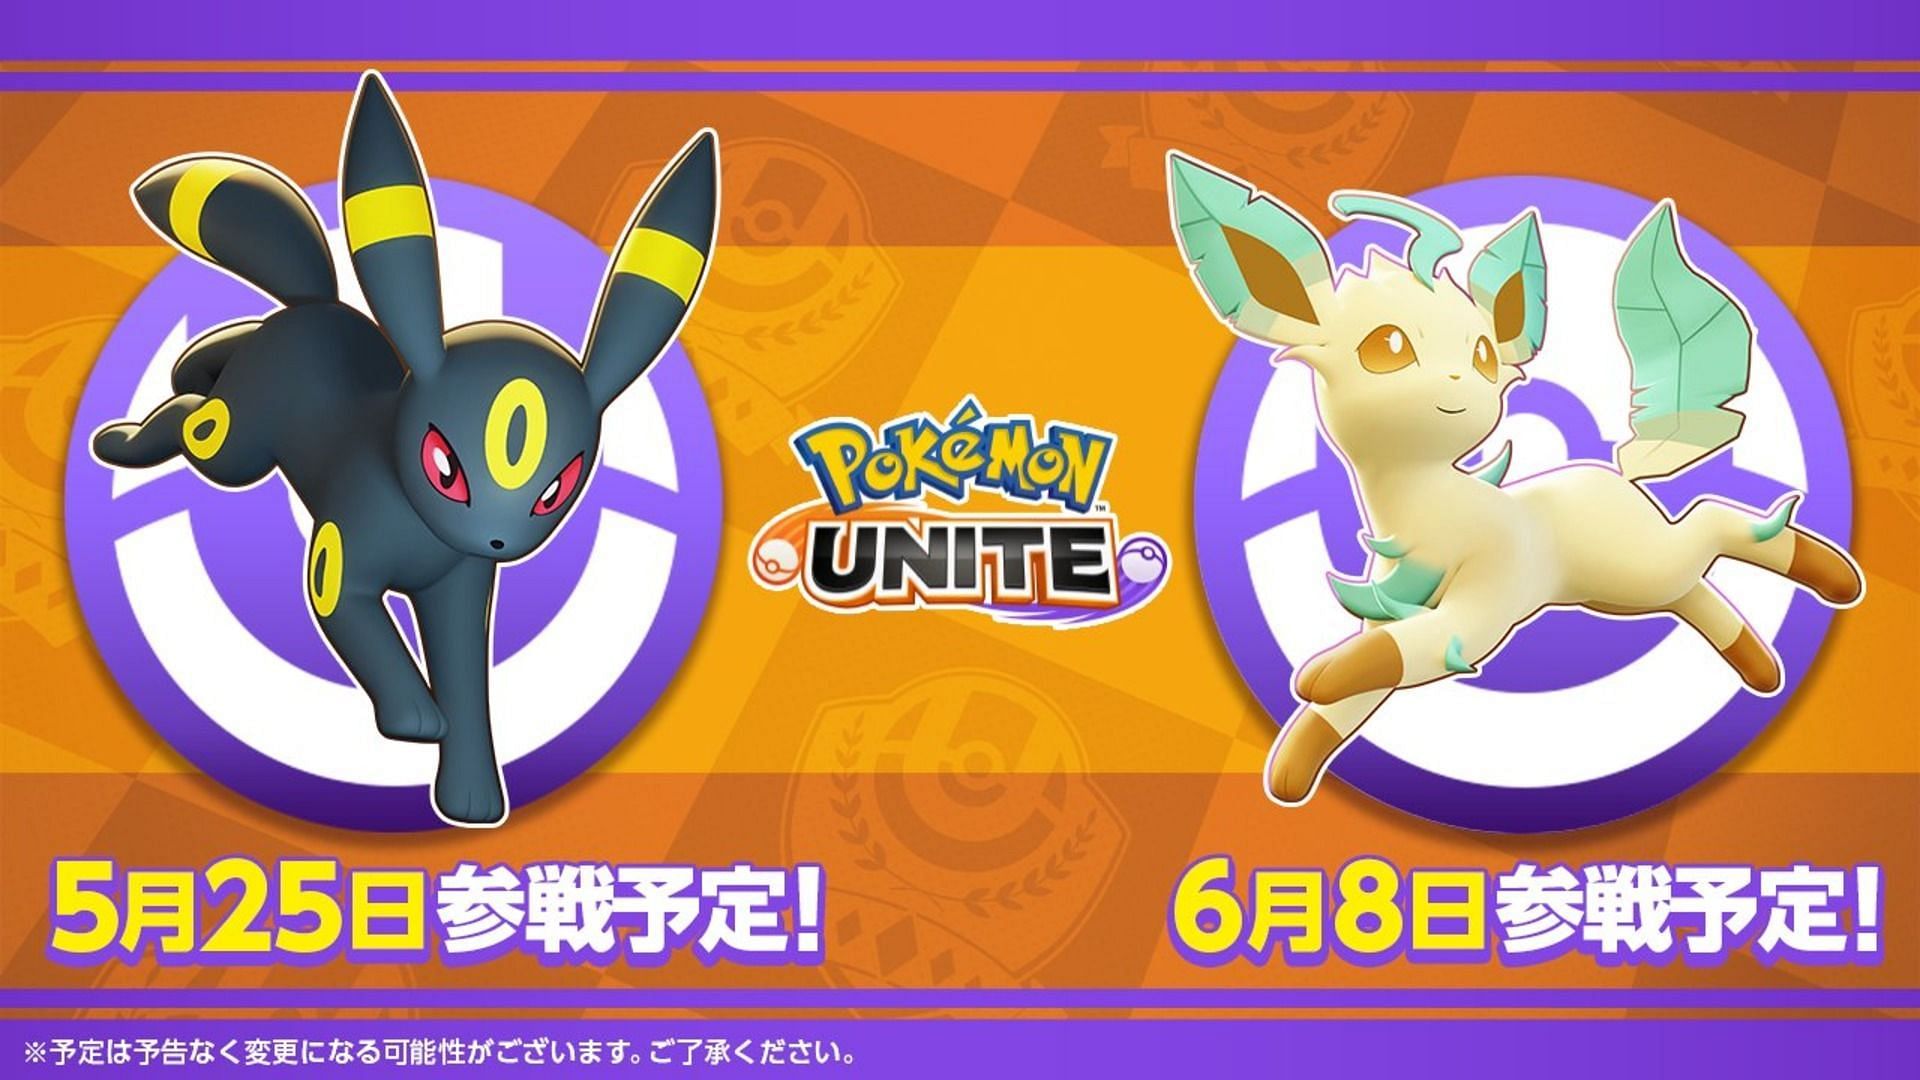 Official artwork for Leafeon and Umbreon for Pokemon Unite (Image via The Pokemon Company)